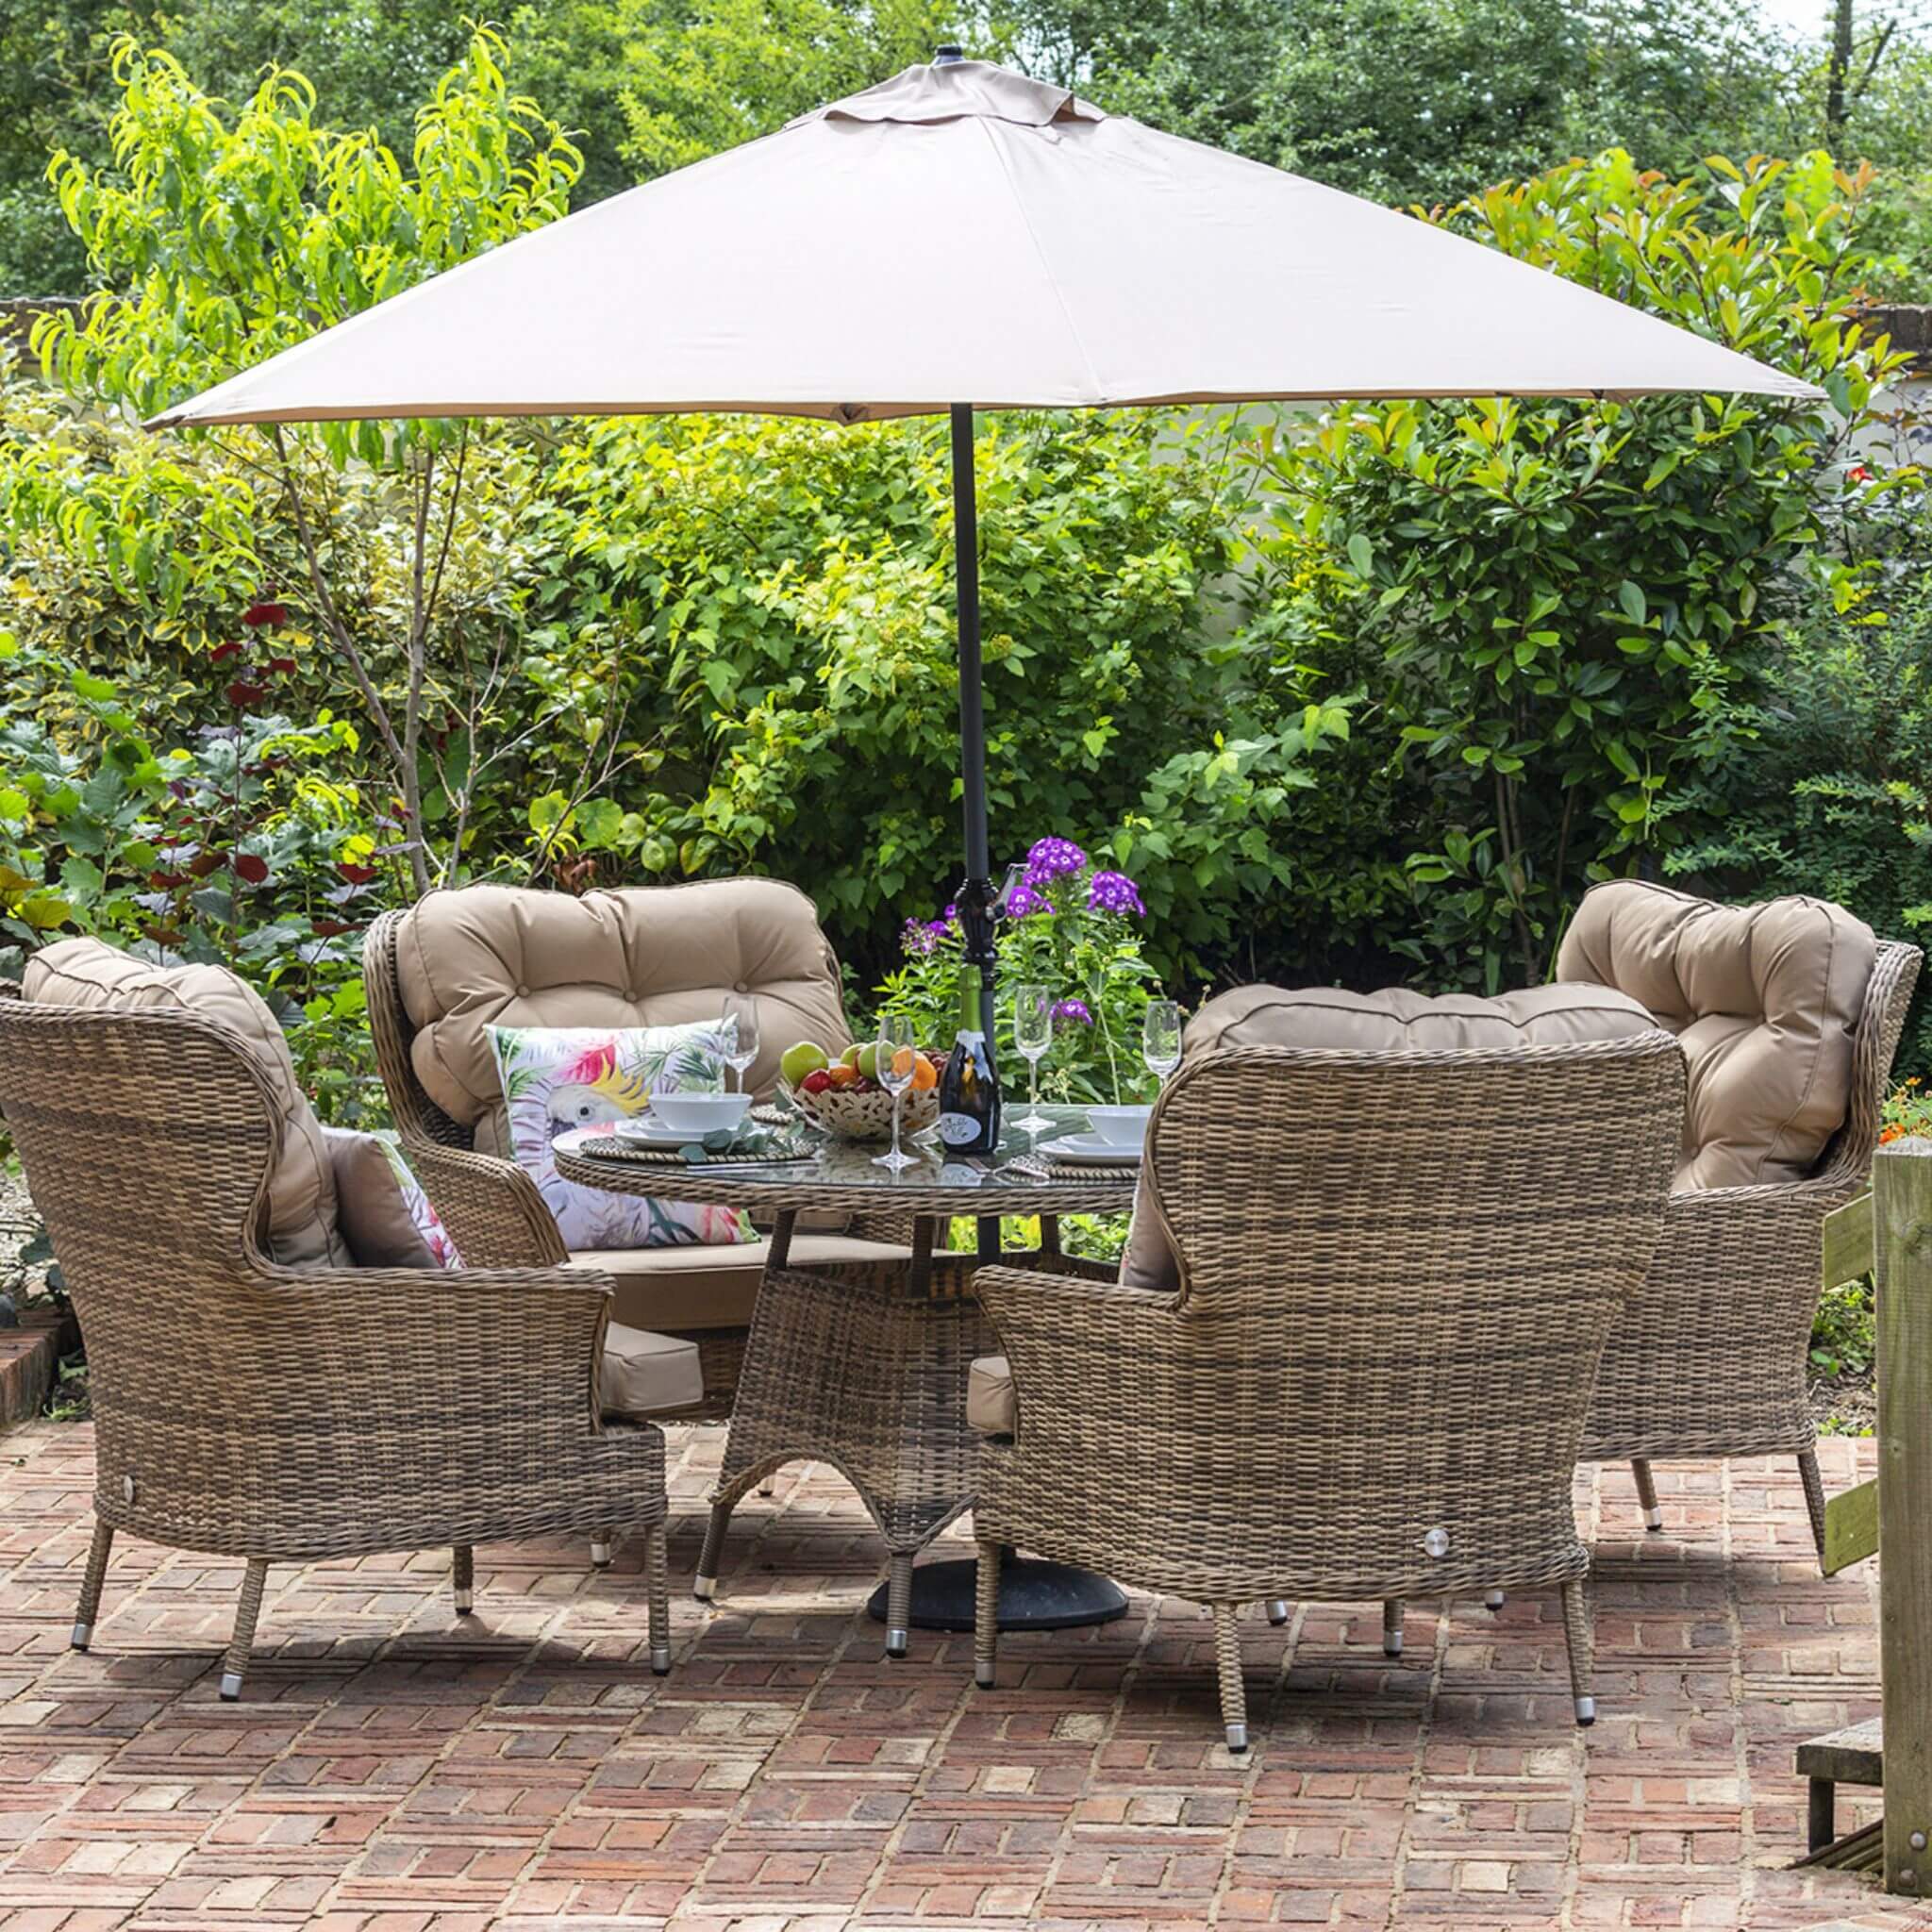 Katie Blake Mayberry 4 Seat Rattan Garden Dining Chairs, Parasol & Round Table Set